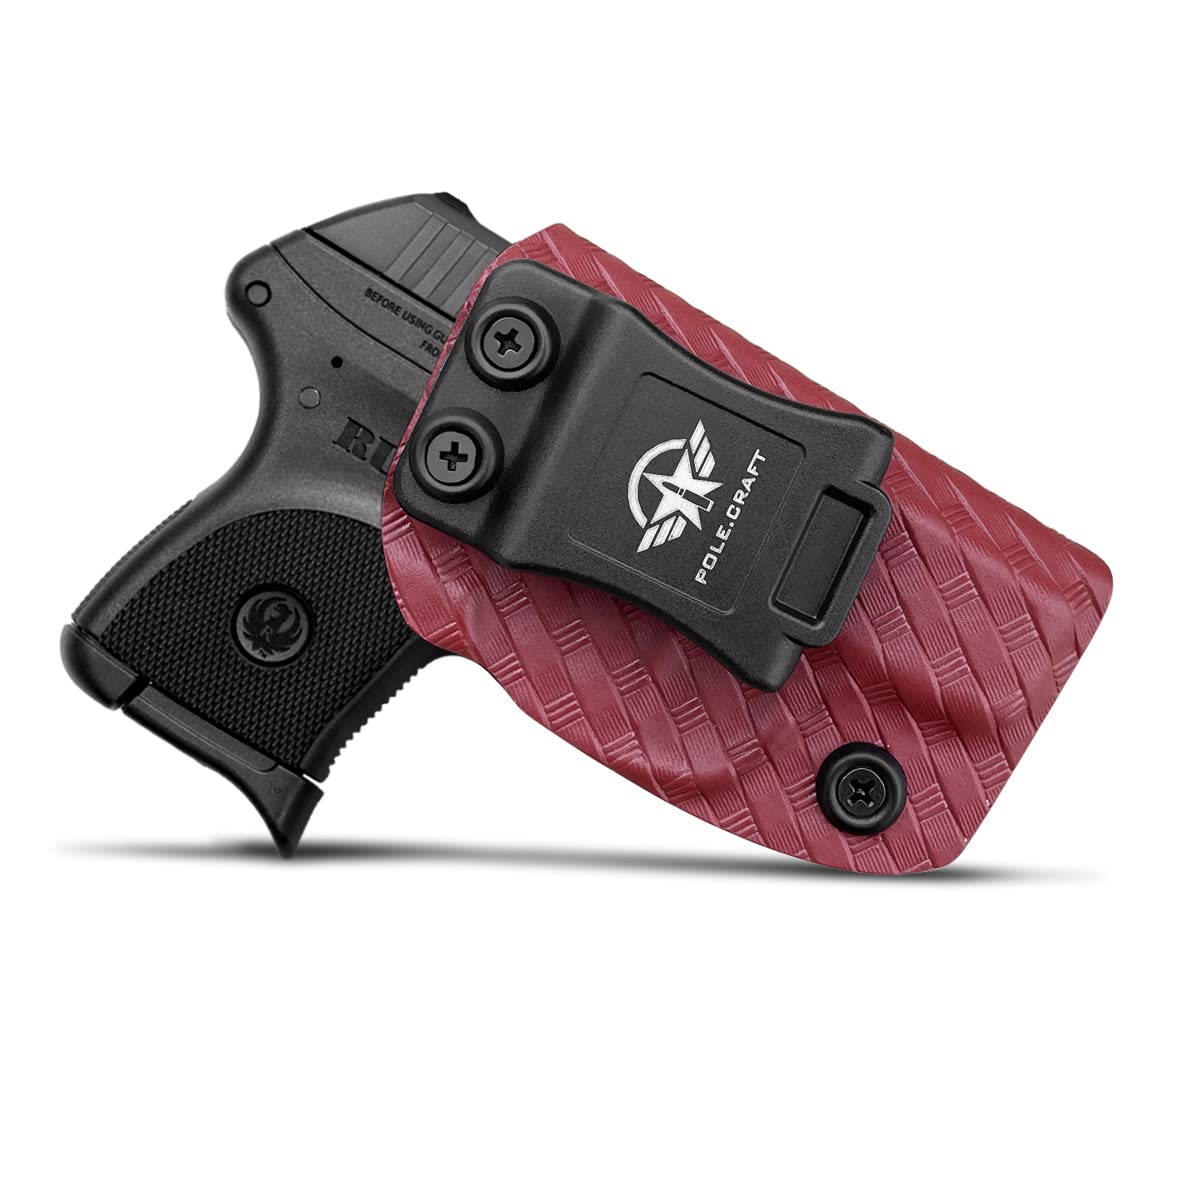  Ruger LCP 2 Holster IWB Kydex for Ruger LCP II Pistol